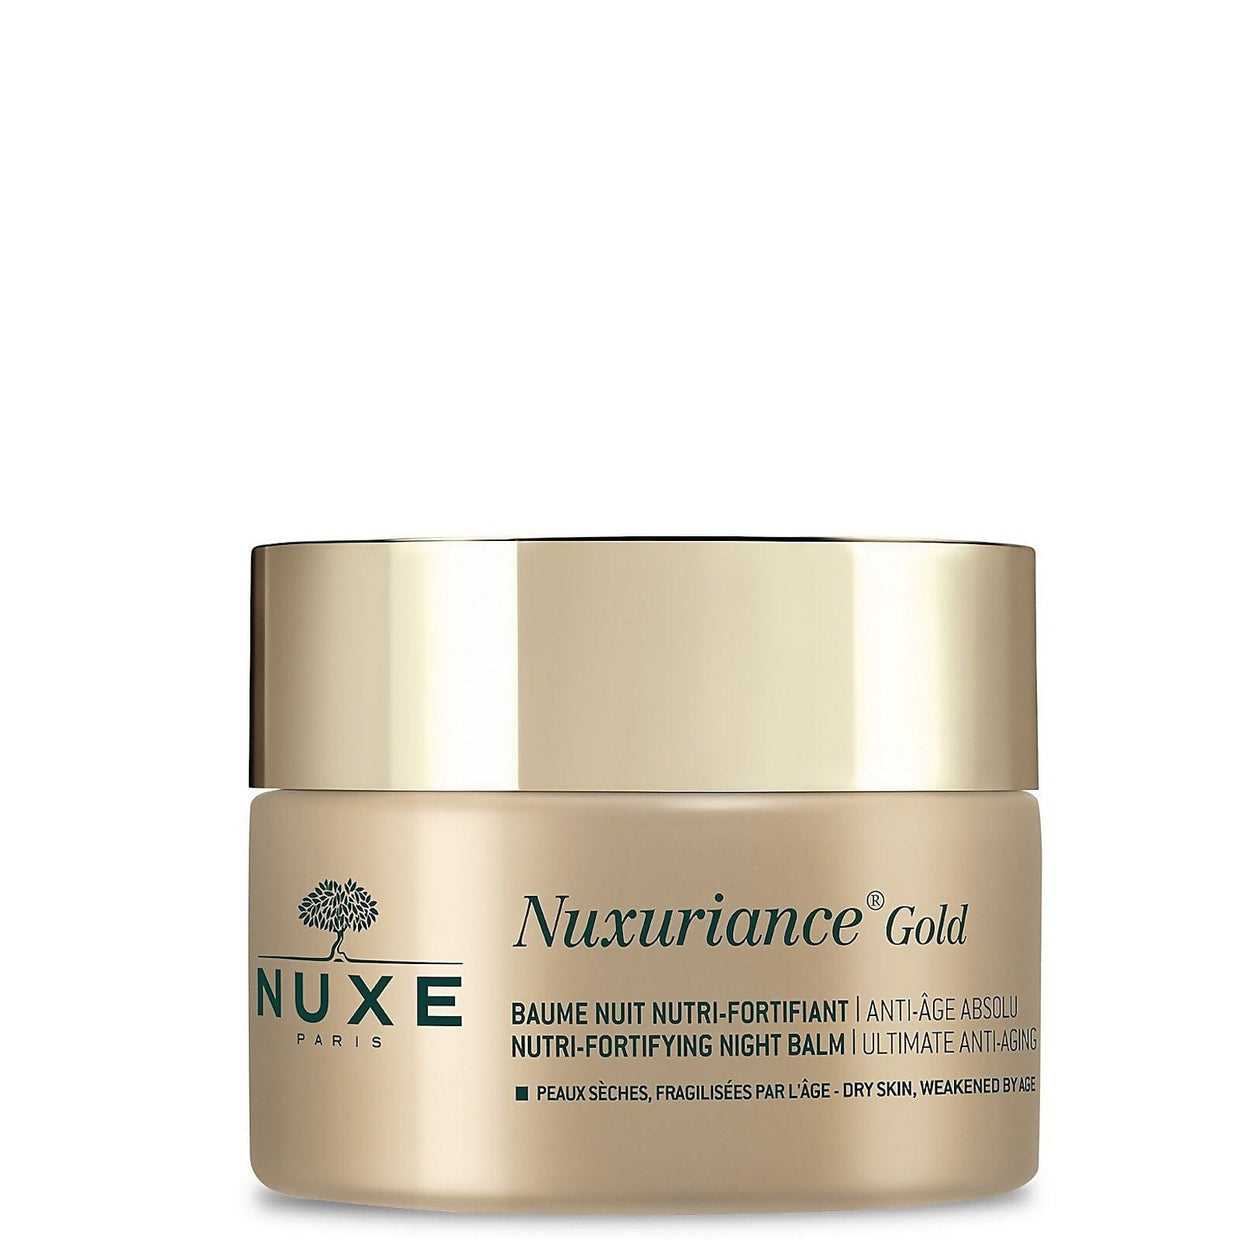 Nuxe Nuxuriance Gold Nutri-Replenishing Night Balm Nuxe 50 ml Shop at Exclusive Beauty Club